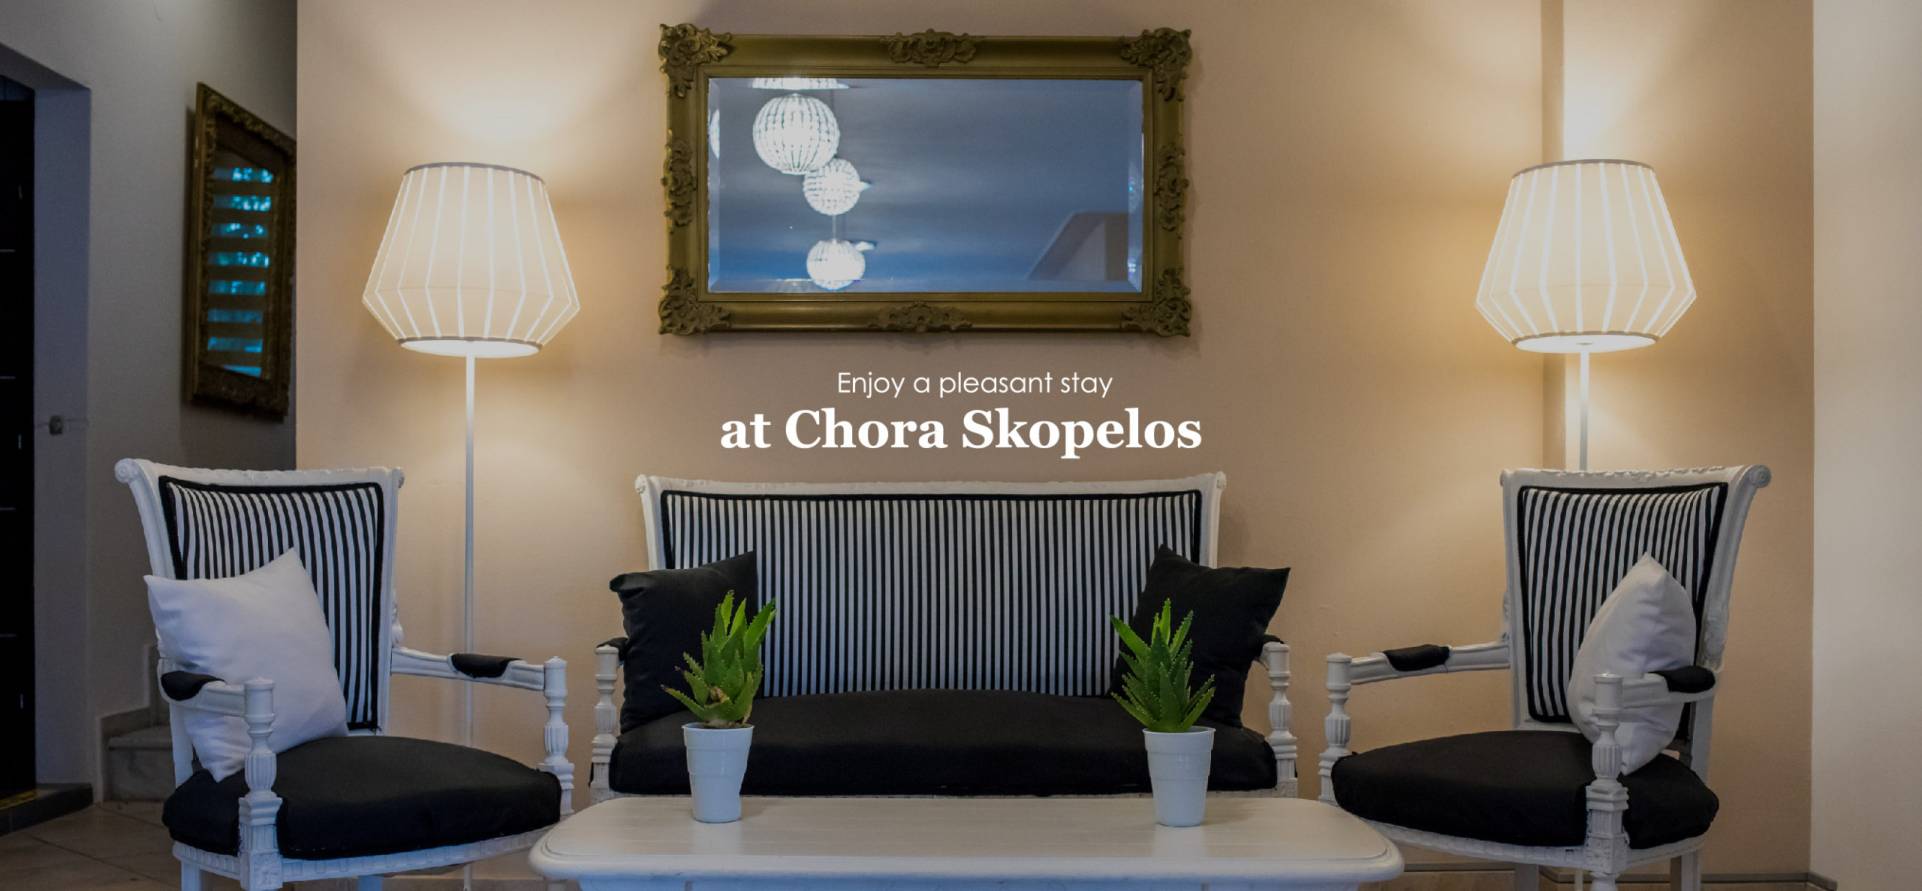 Skopelos Holidays Hotel & Spa offers comfortable and luxurious accommodation in the town of Skopelos